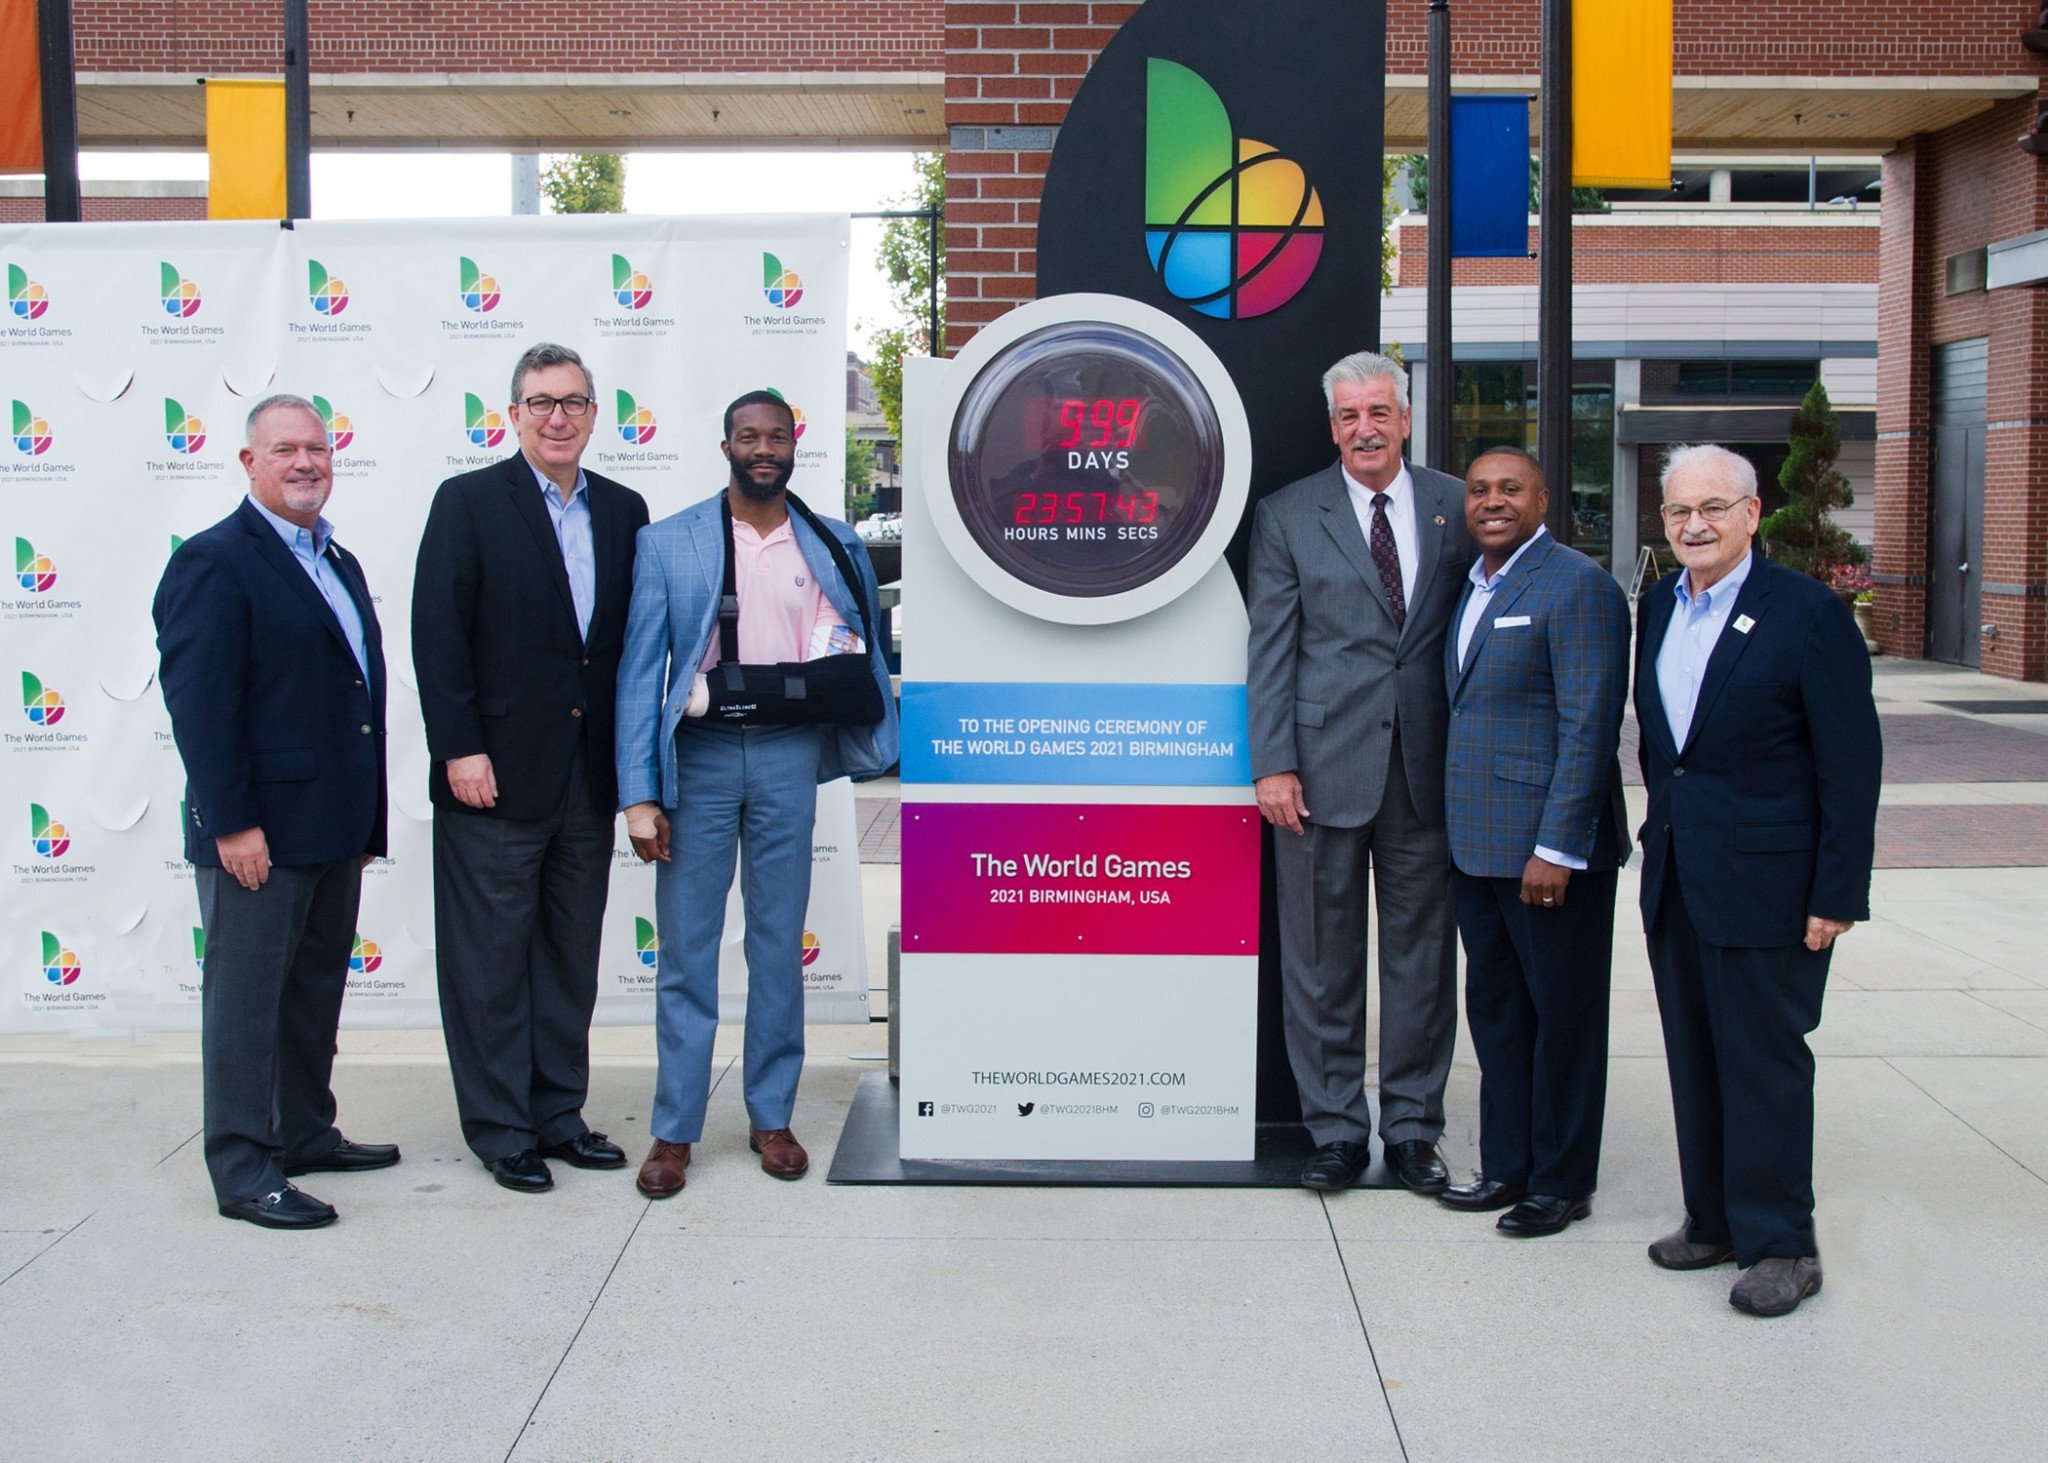 Birmingham 2021 Announces First Corporate Sponsors of World Games